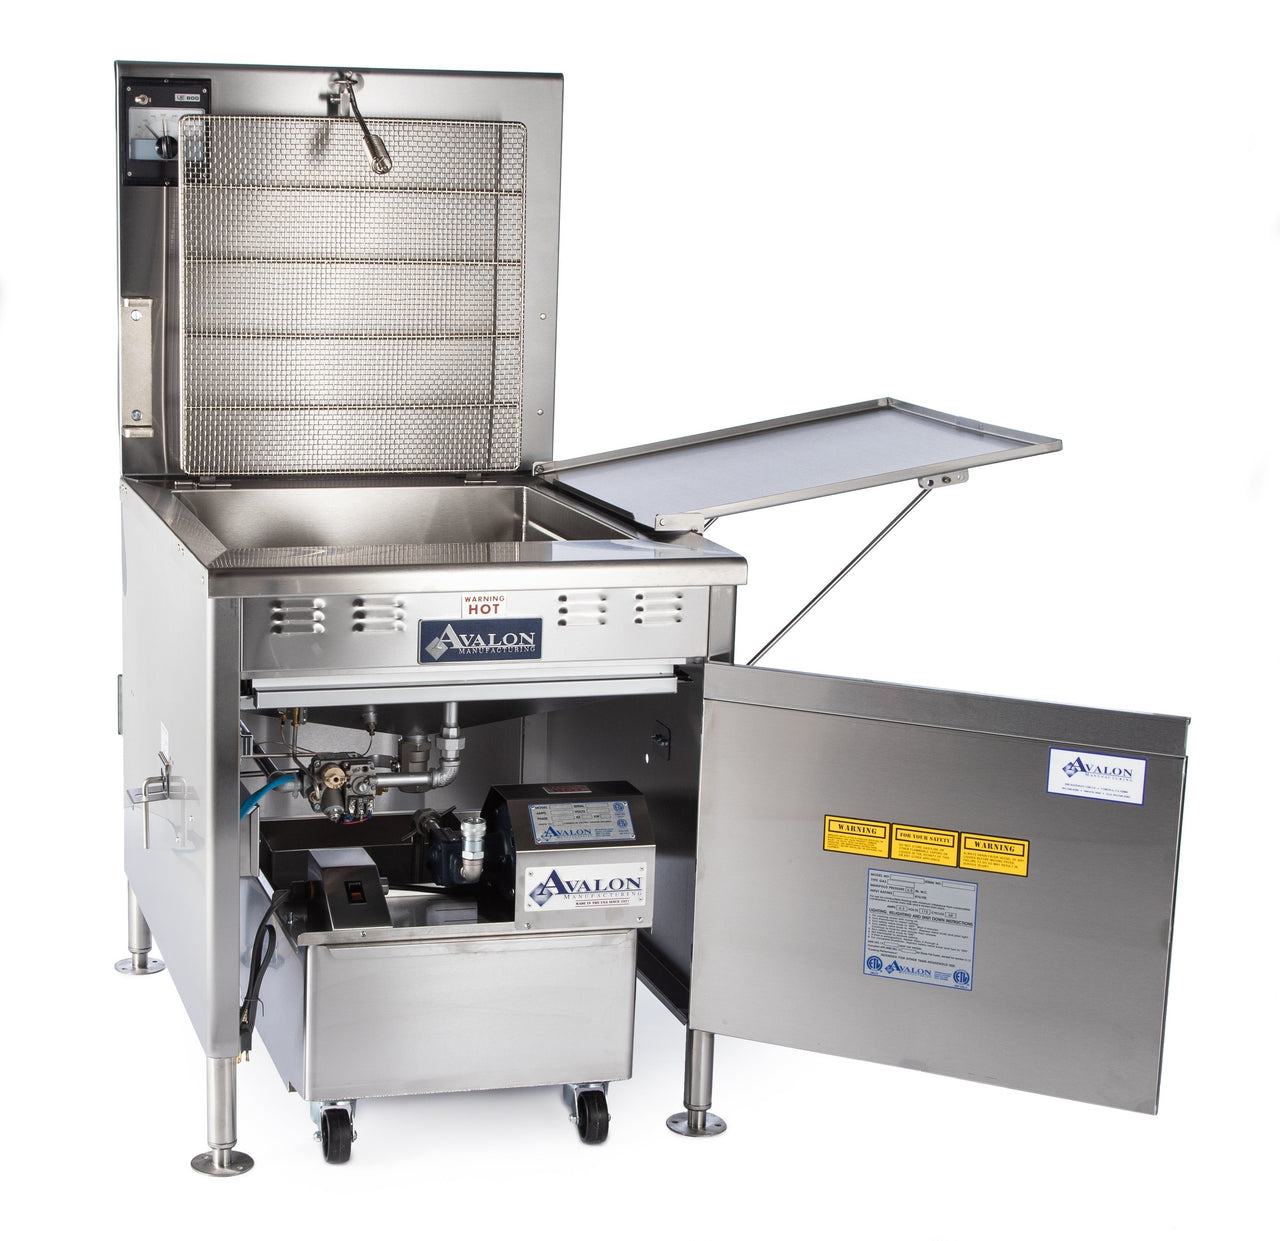 Avalon 24" x 24" Donut Fryer, Natural Gas, Standing Pilot, No Power, Left Side Drain Board With Submerger